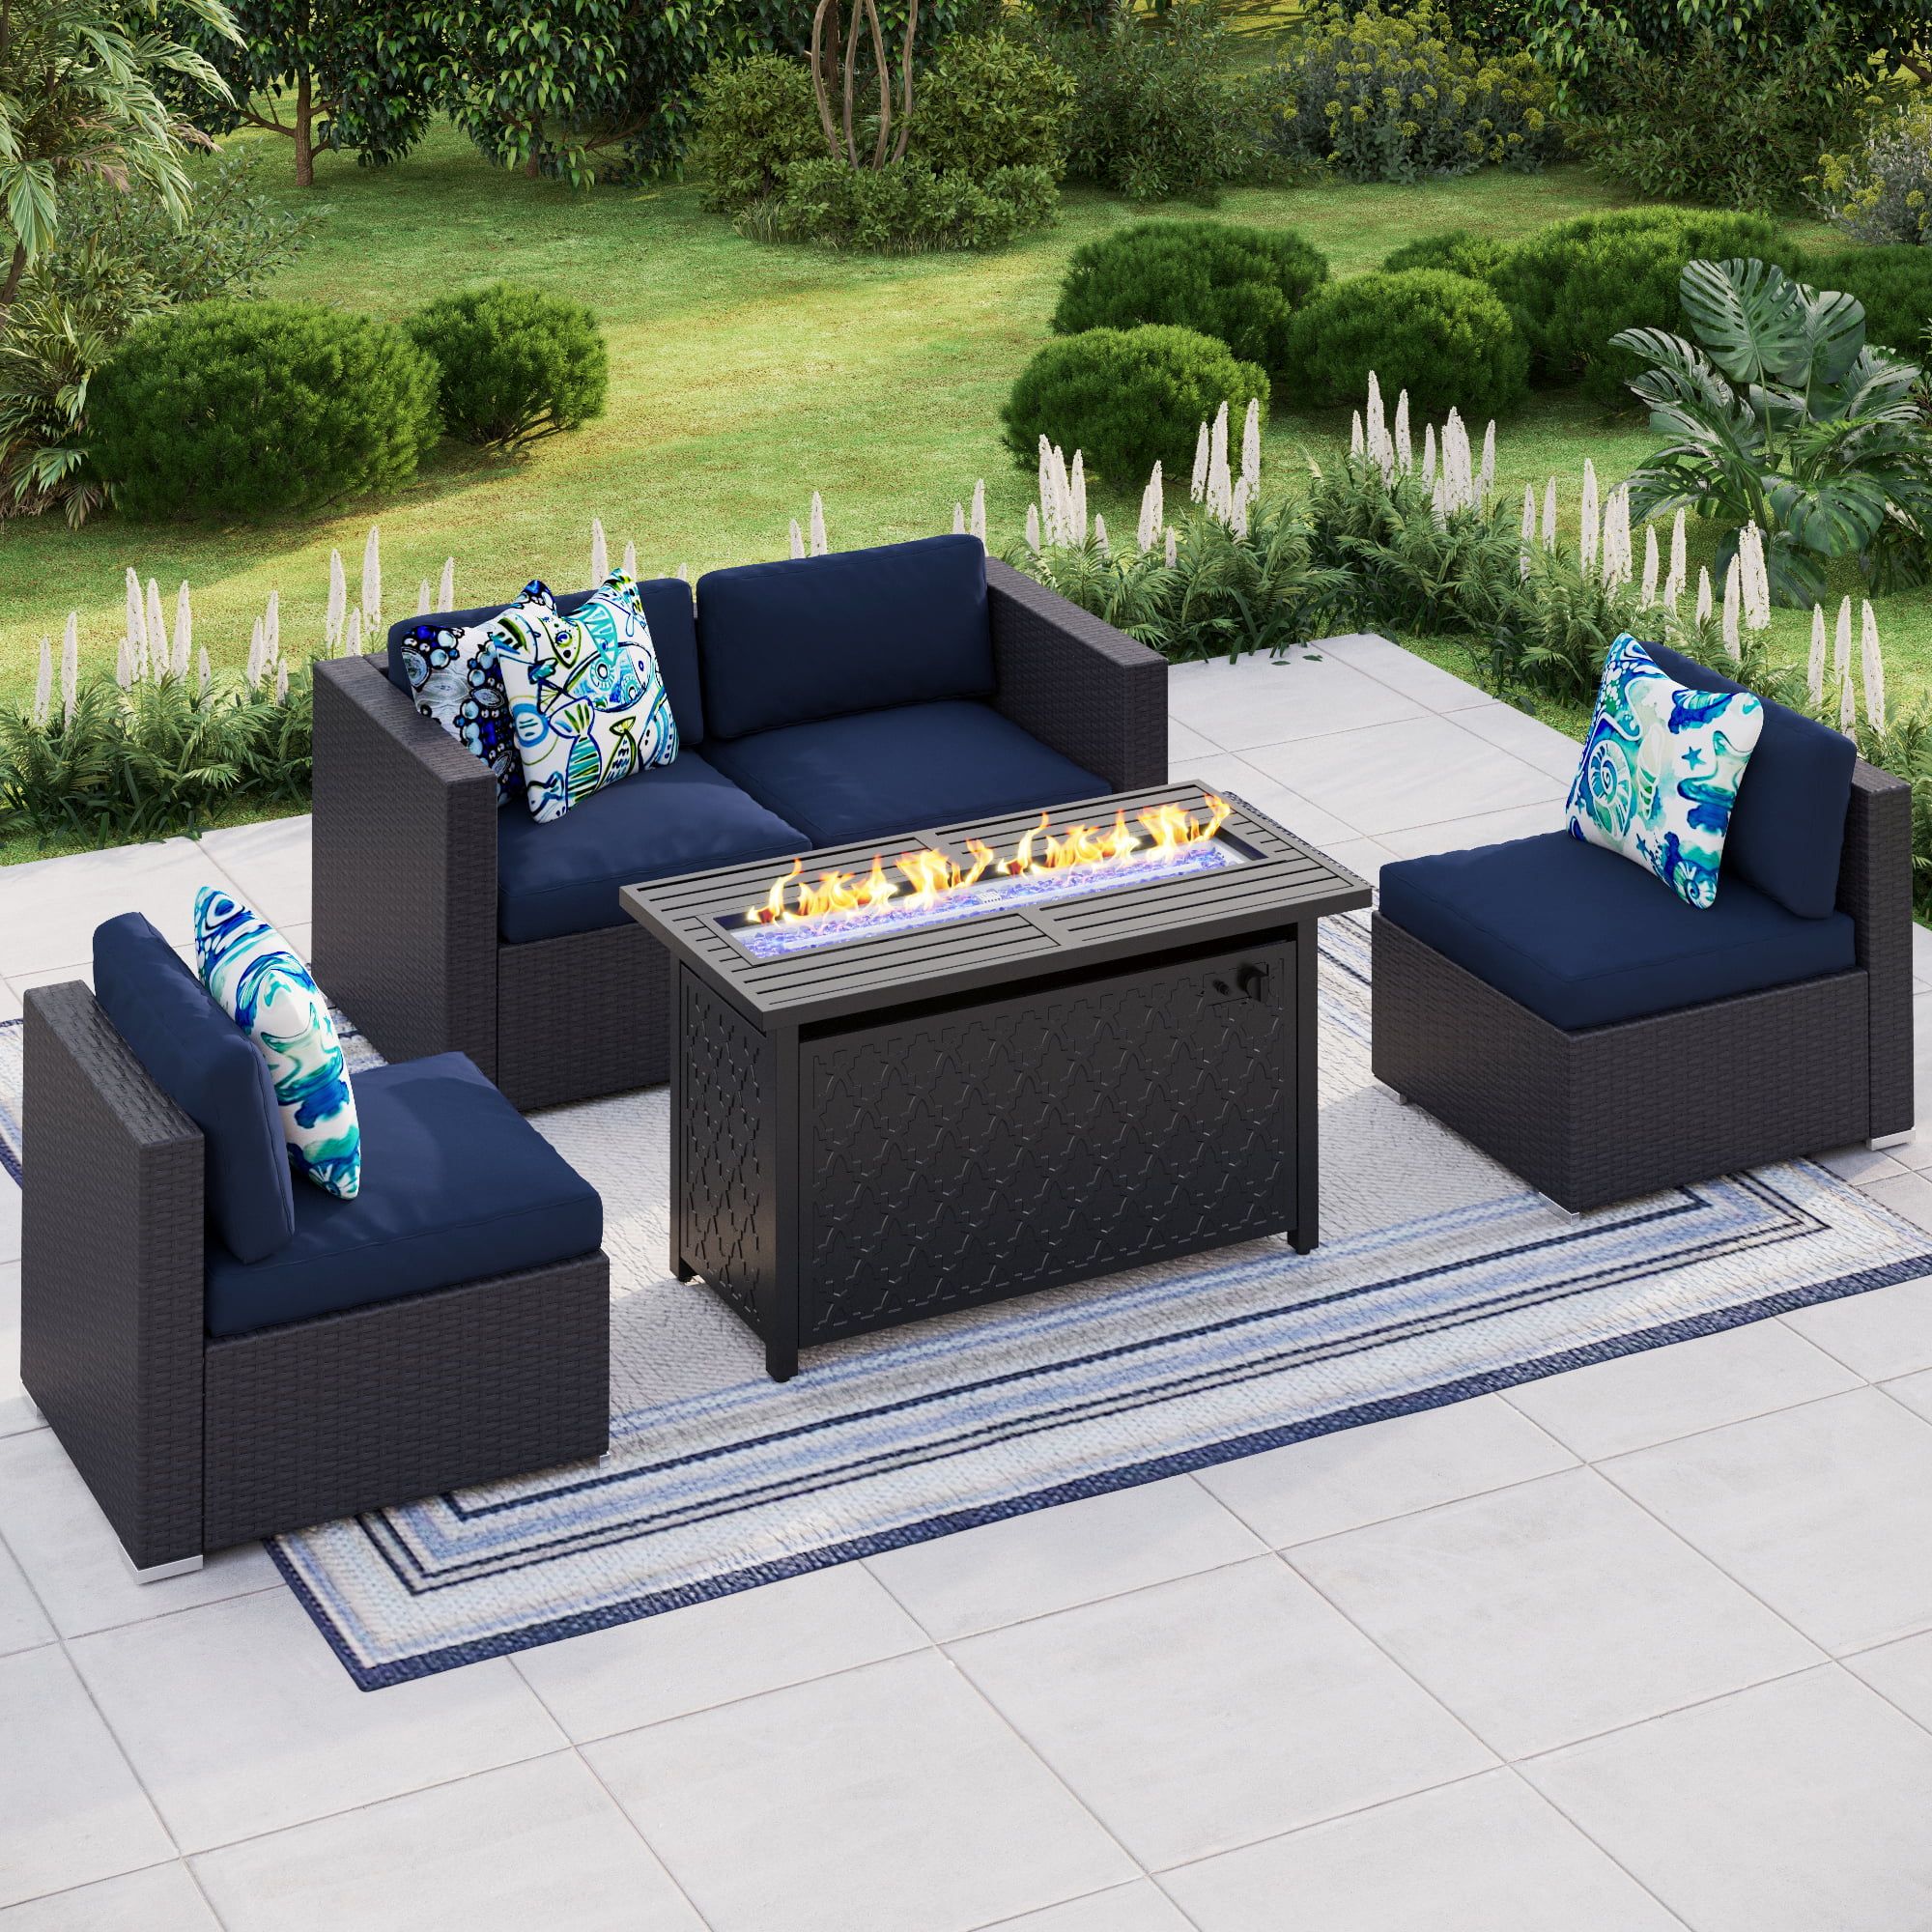 Mf Studio 5pcs Gas Fire Pit Table Set, 4pcs Patio Conversation Sets With 45  Inch Rectangular Outdoor Firepits, Bluel Fire Glass And Lid For Free, Black  – Walmart Throughout Fire Pit Table Wicker Sectional Sofa Conversation Set (View 10 of 15)